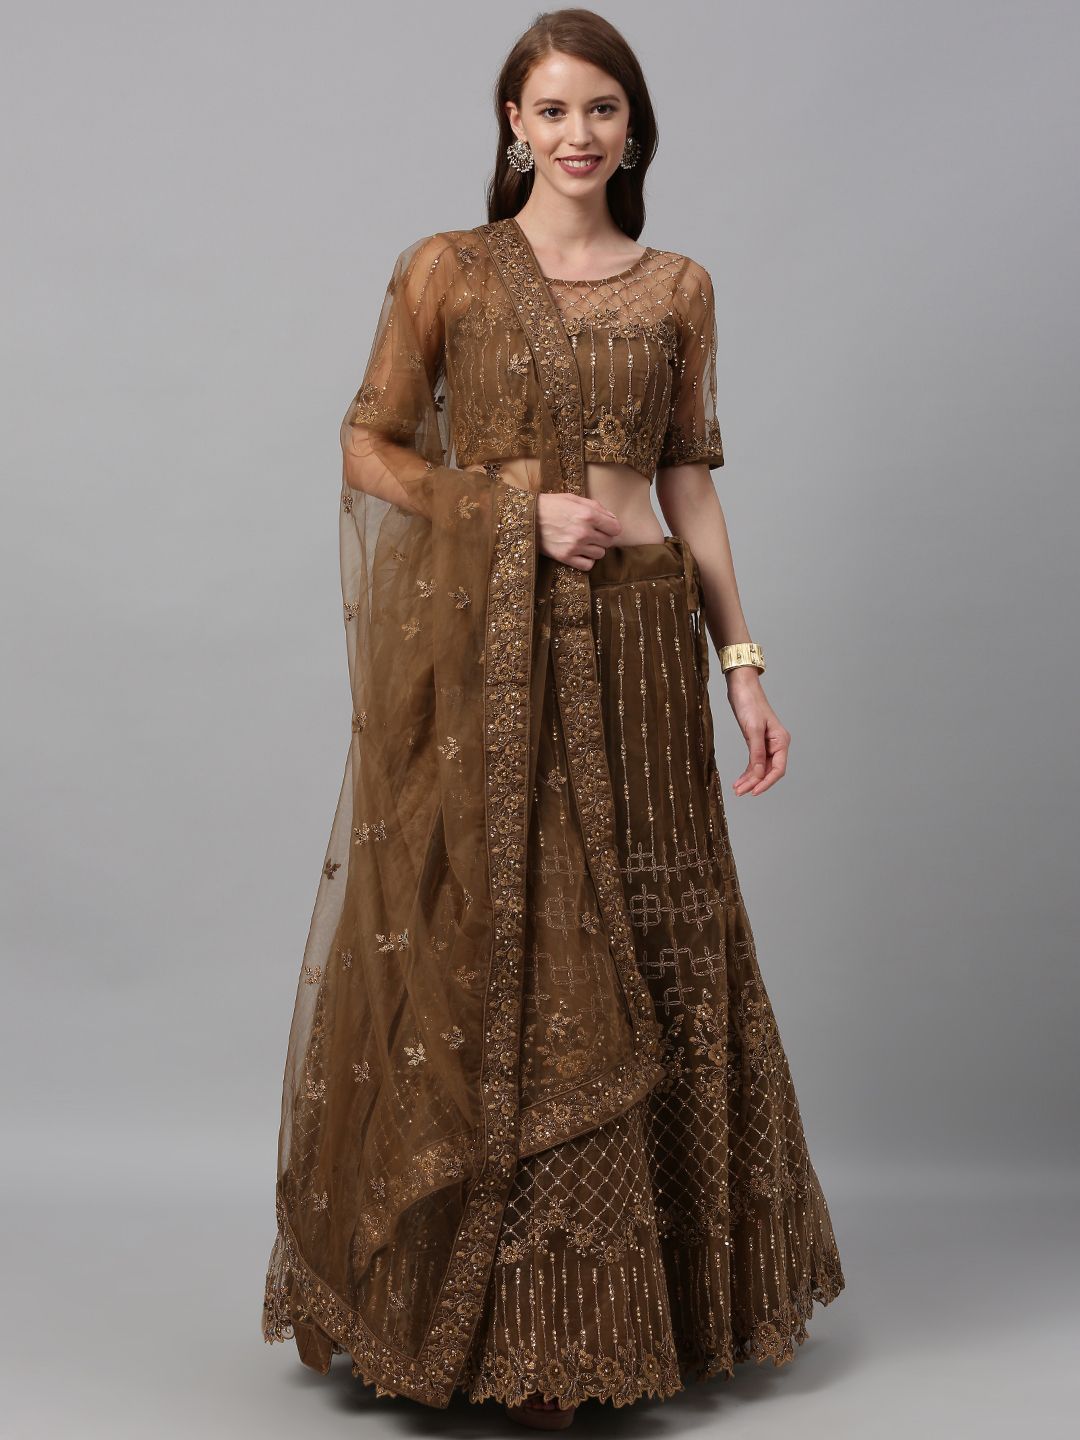 Brown Embroidered Semi-Stitched Myntra Lehenga & Blouse with Dupatta